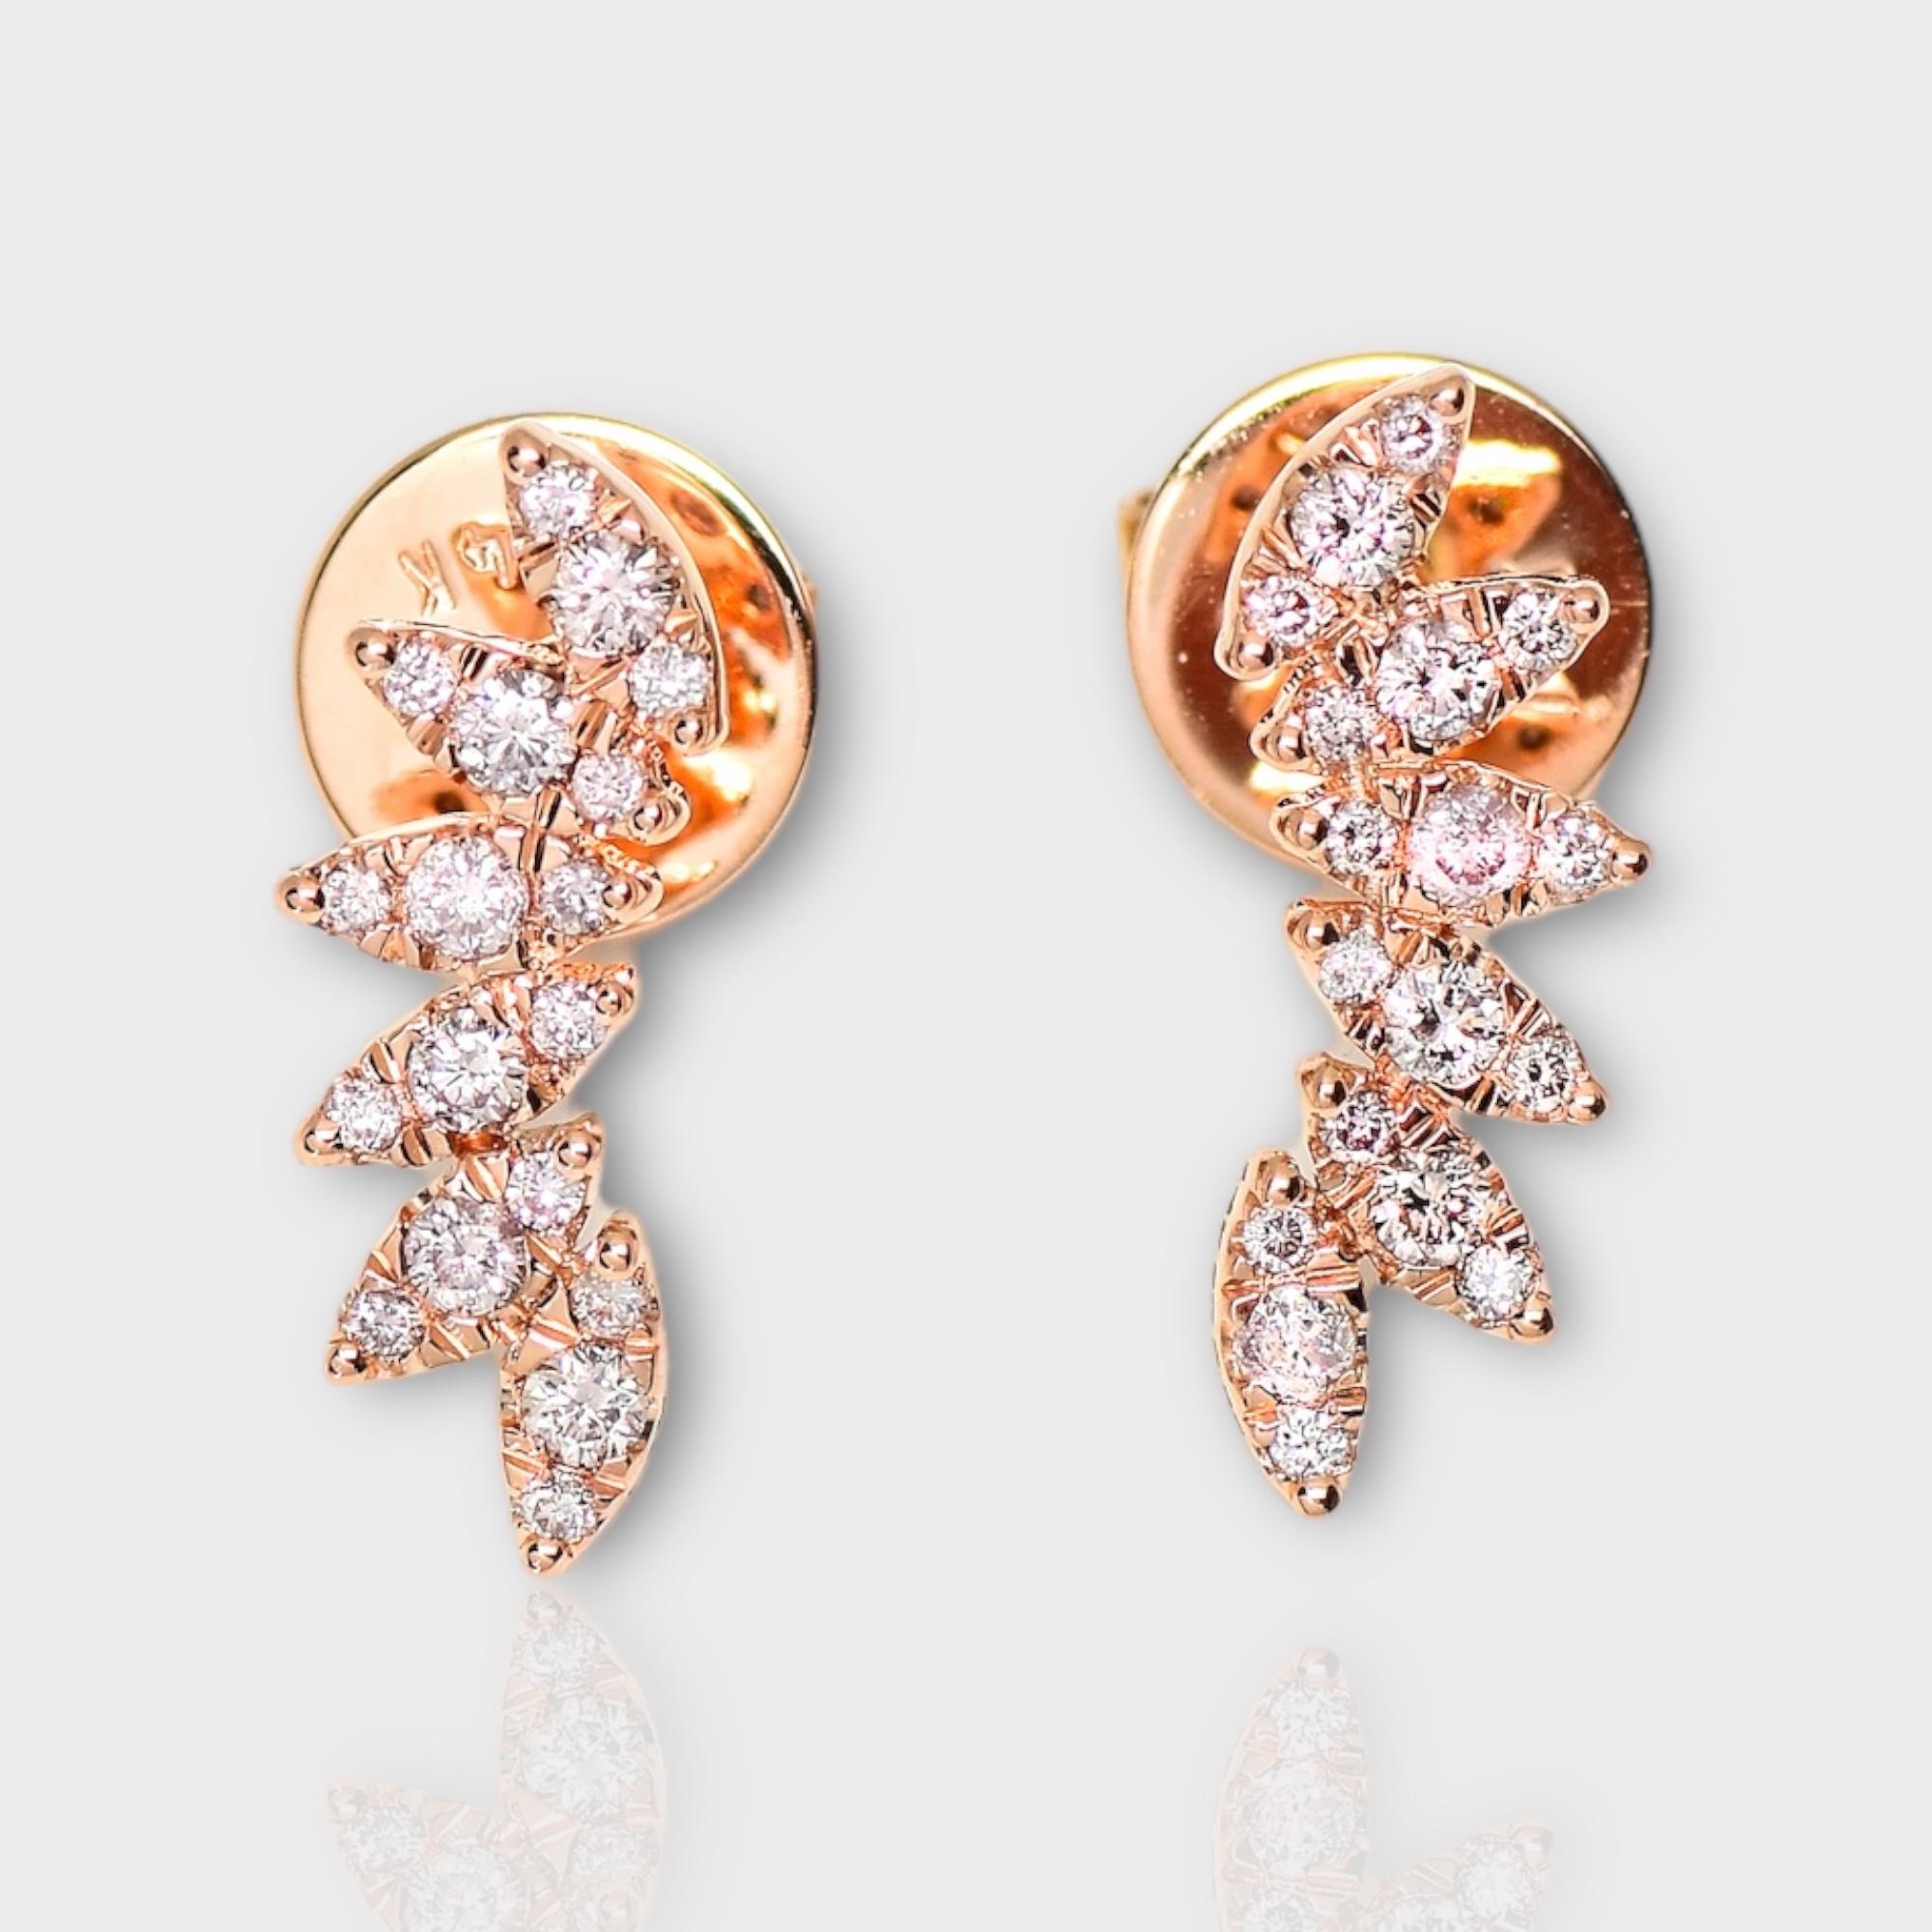 *IGI 14K 0.33 ct Natural Pink Diamonds Art Deco Design Stud Earrings*

This band features a stunning design with an art deco crafted from 14K rose gold. It is set with natural pink diamonds weighing 0.33 carats.

These earrings feature colorful